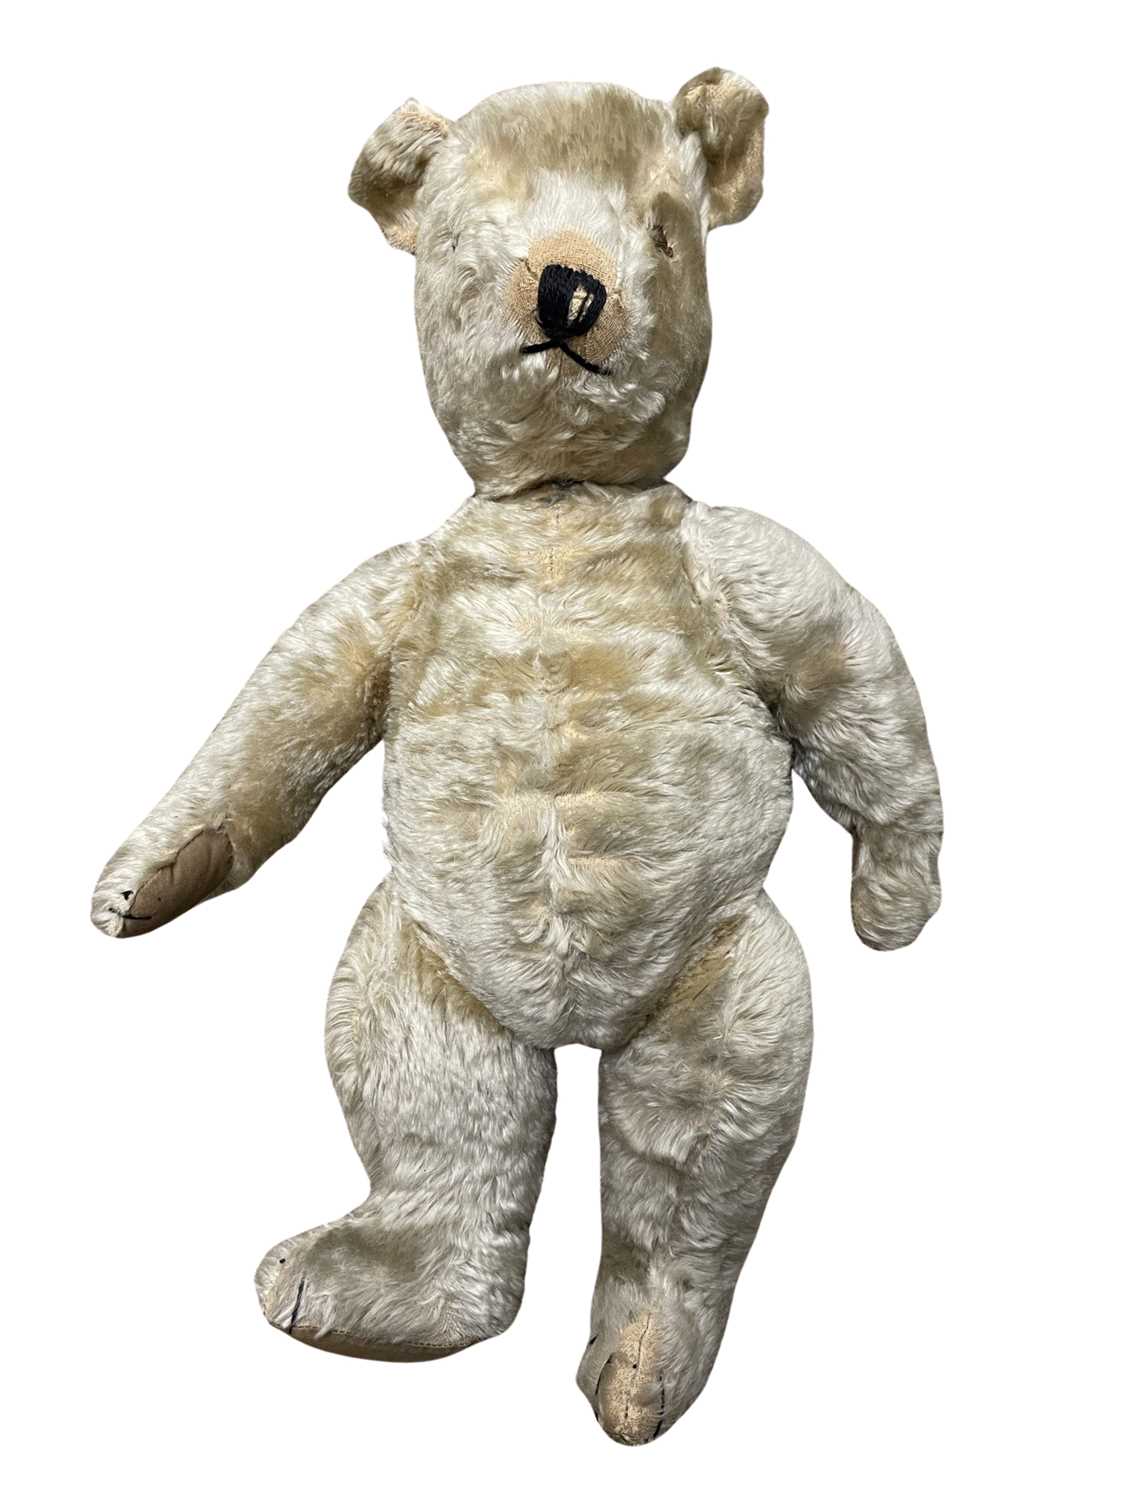 A large vintage 5-jointed teddy bear, with hand-sewn eyes, snout and paw detail. No maker's mark,